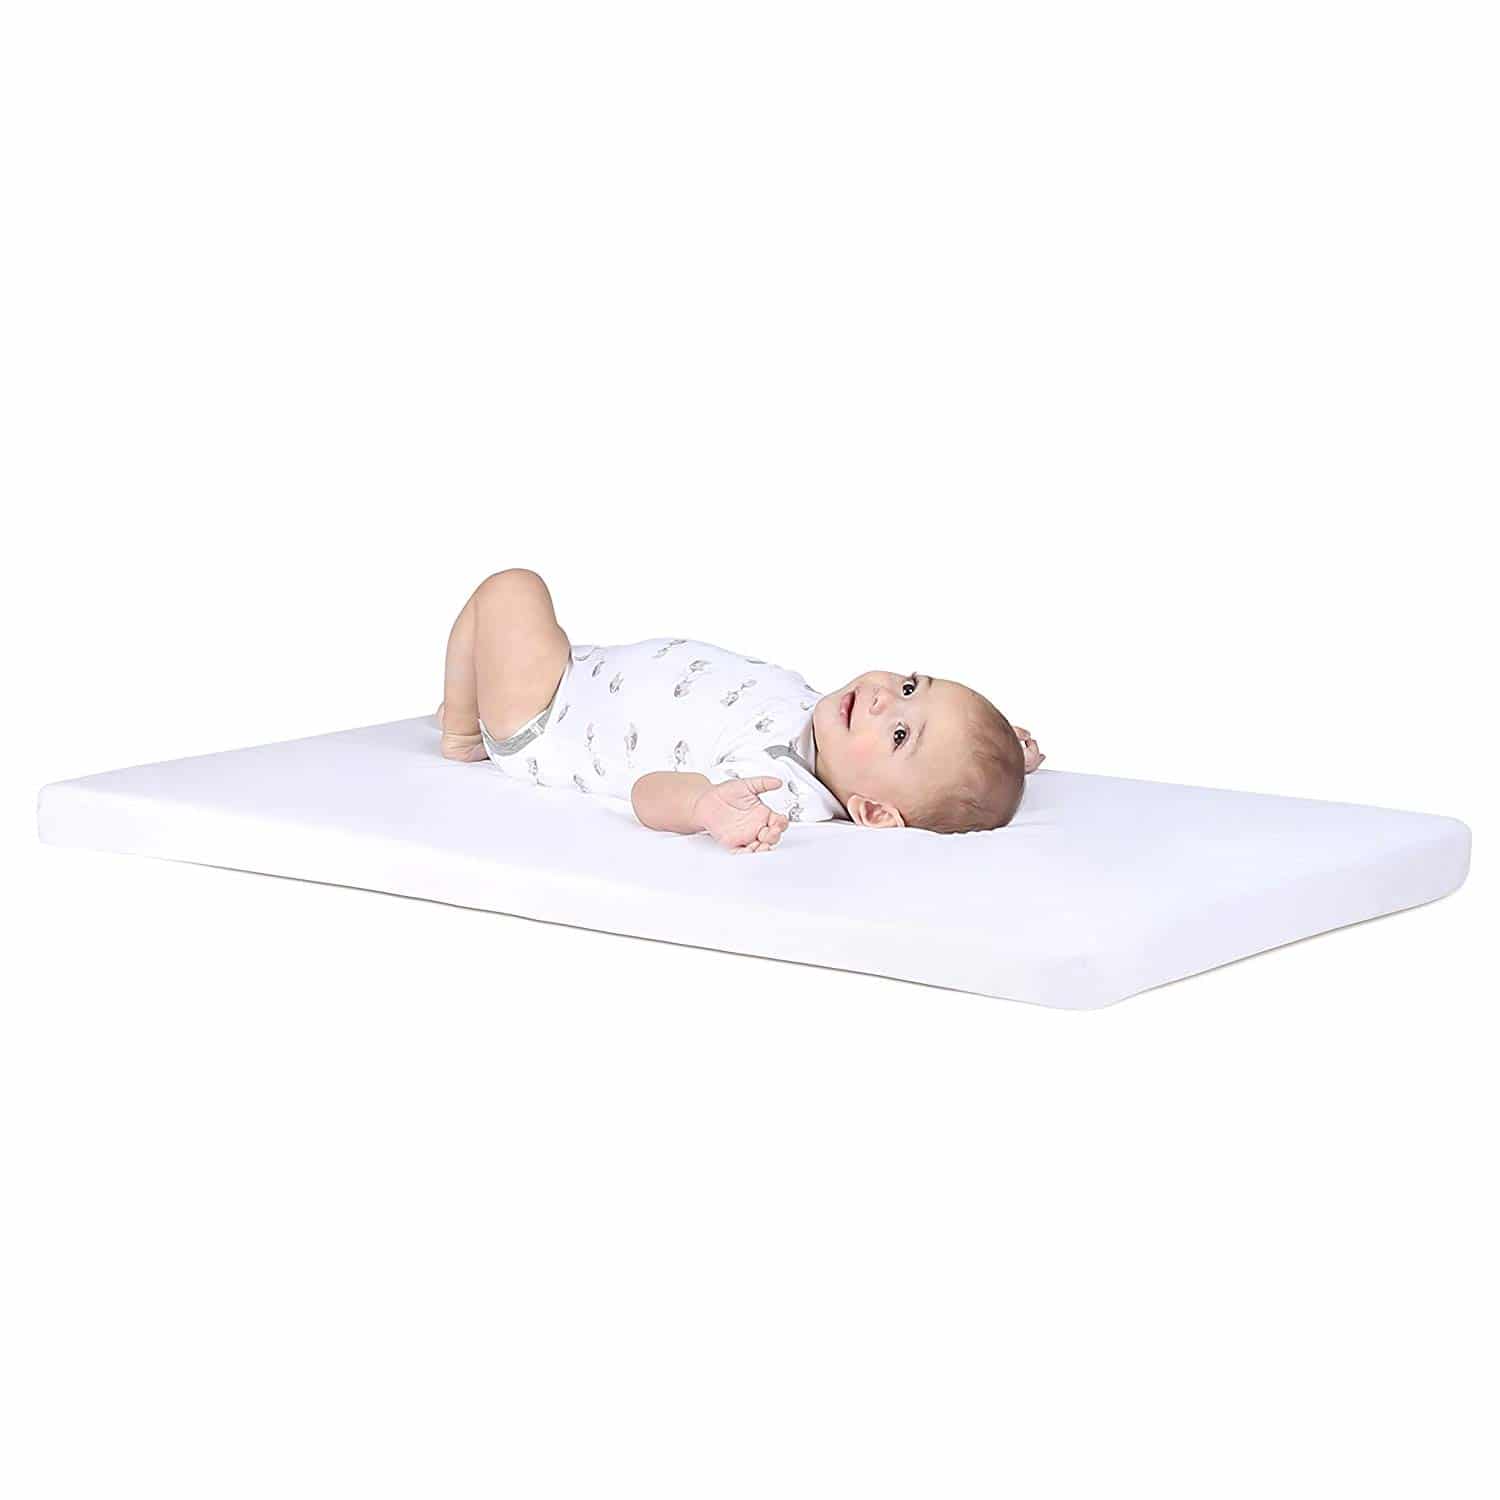 5 Best Mattresses for Graco Pack N' Play Reviewed in ...